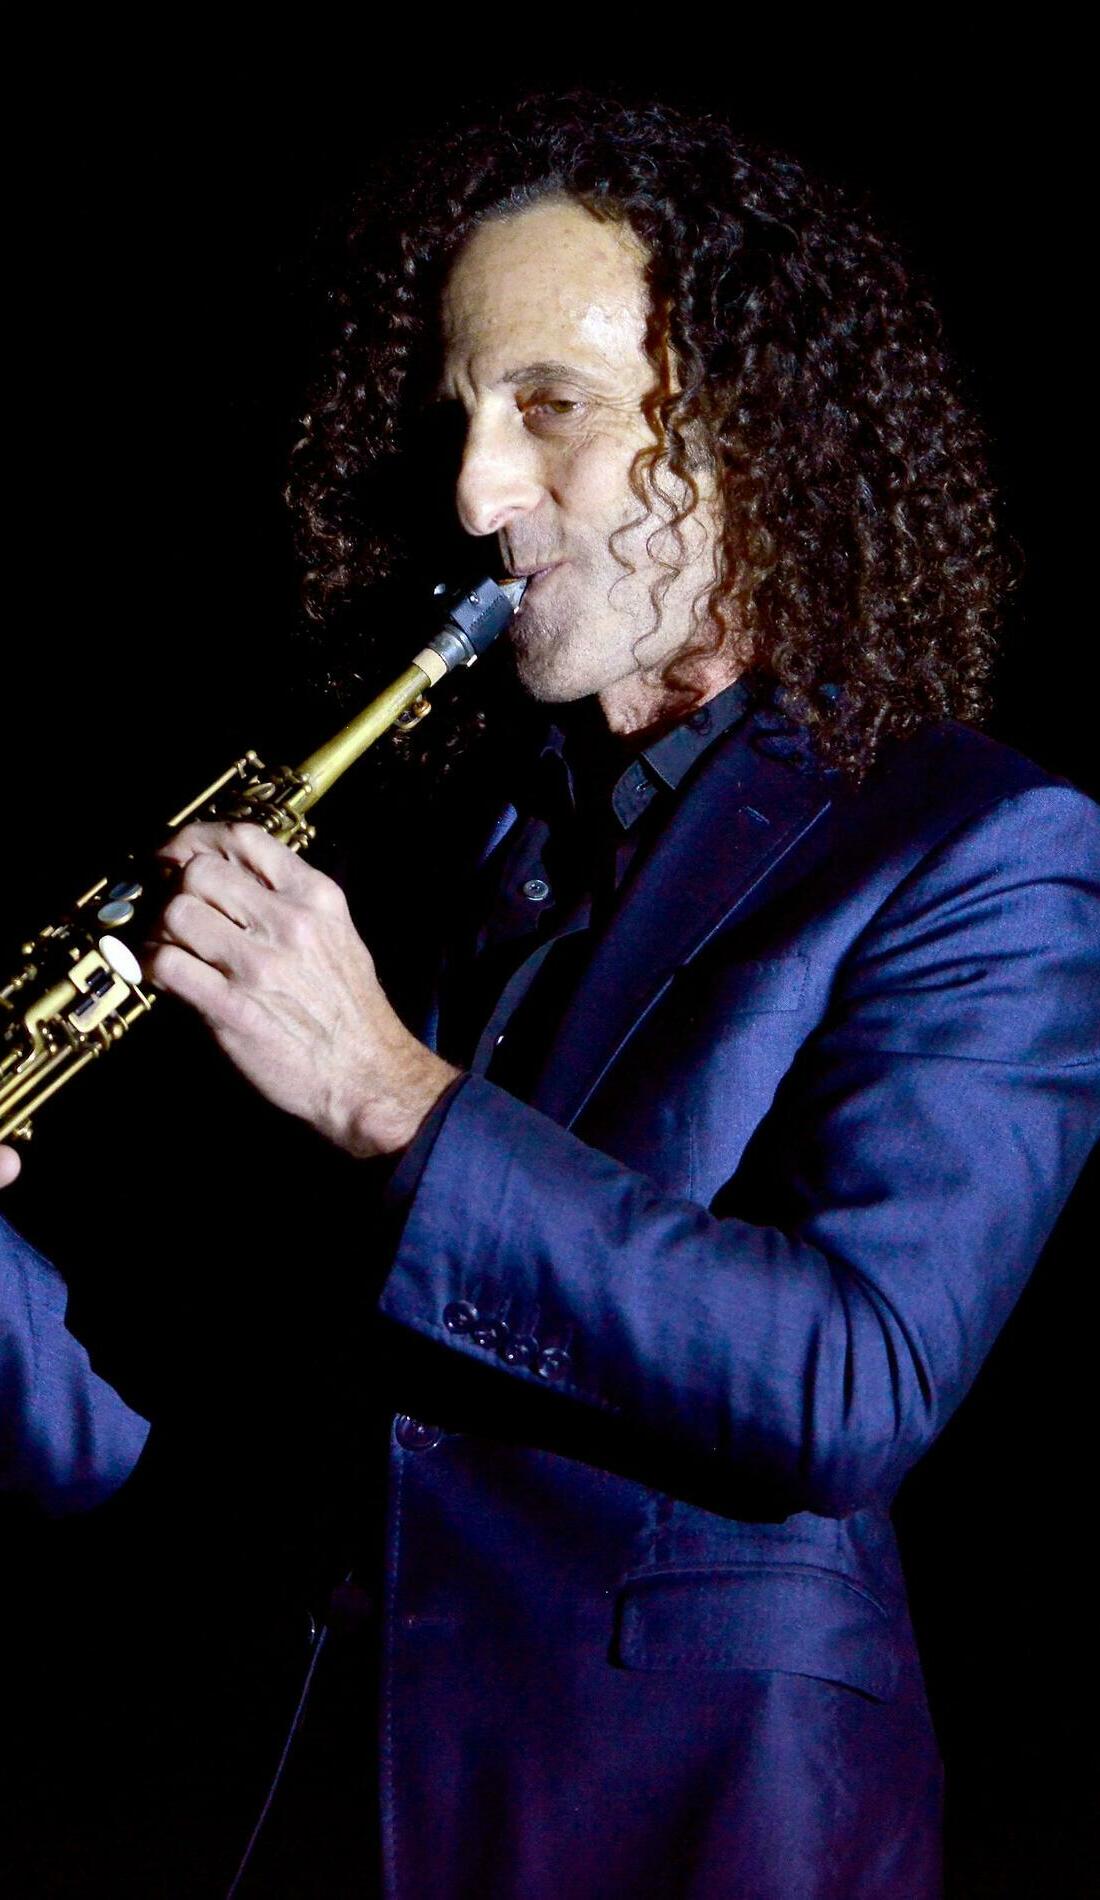 A Kenny G live event